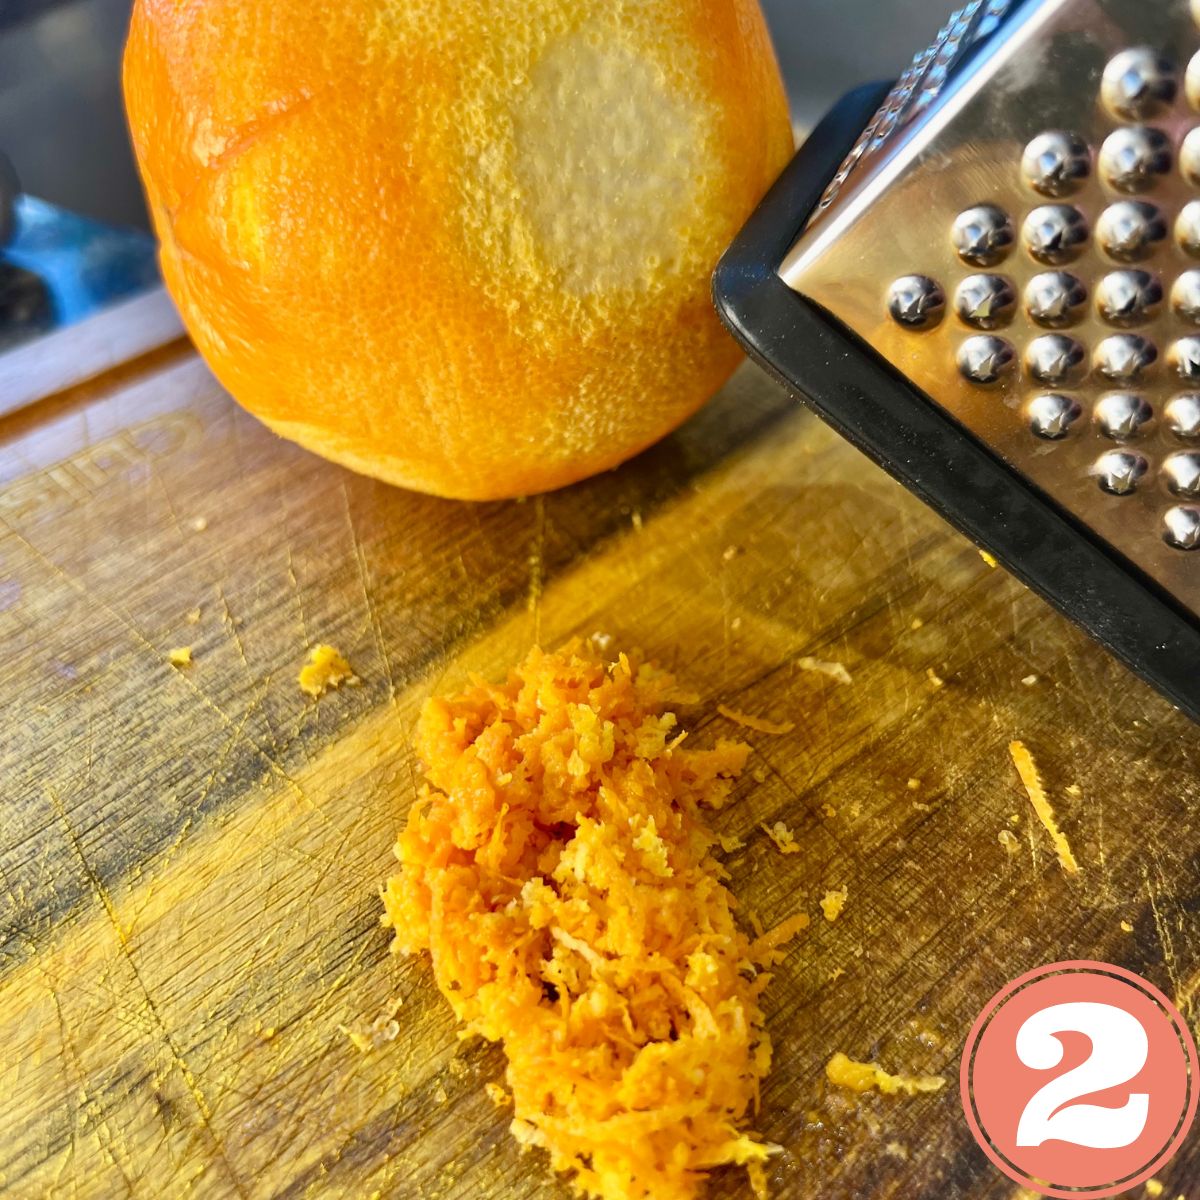 An orange being zested on a cutting board with a pile of orange zest